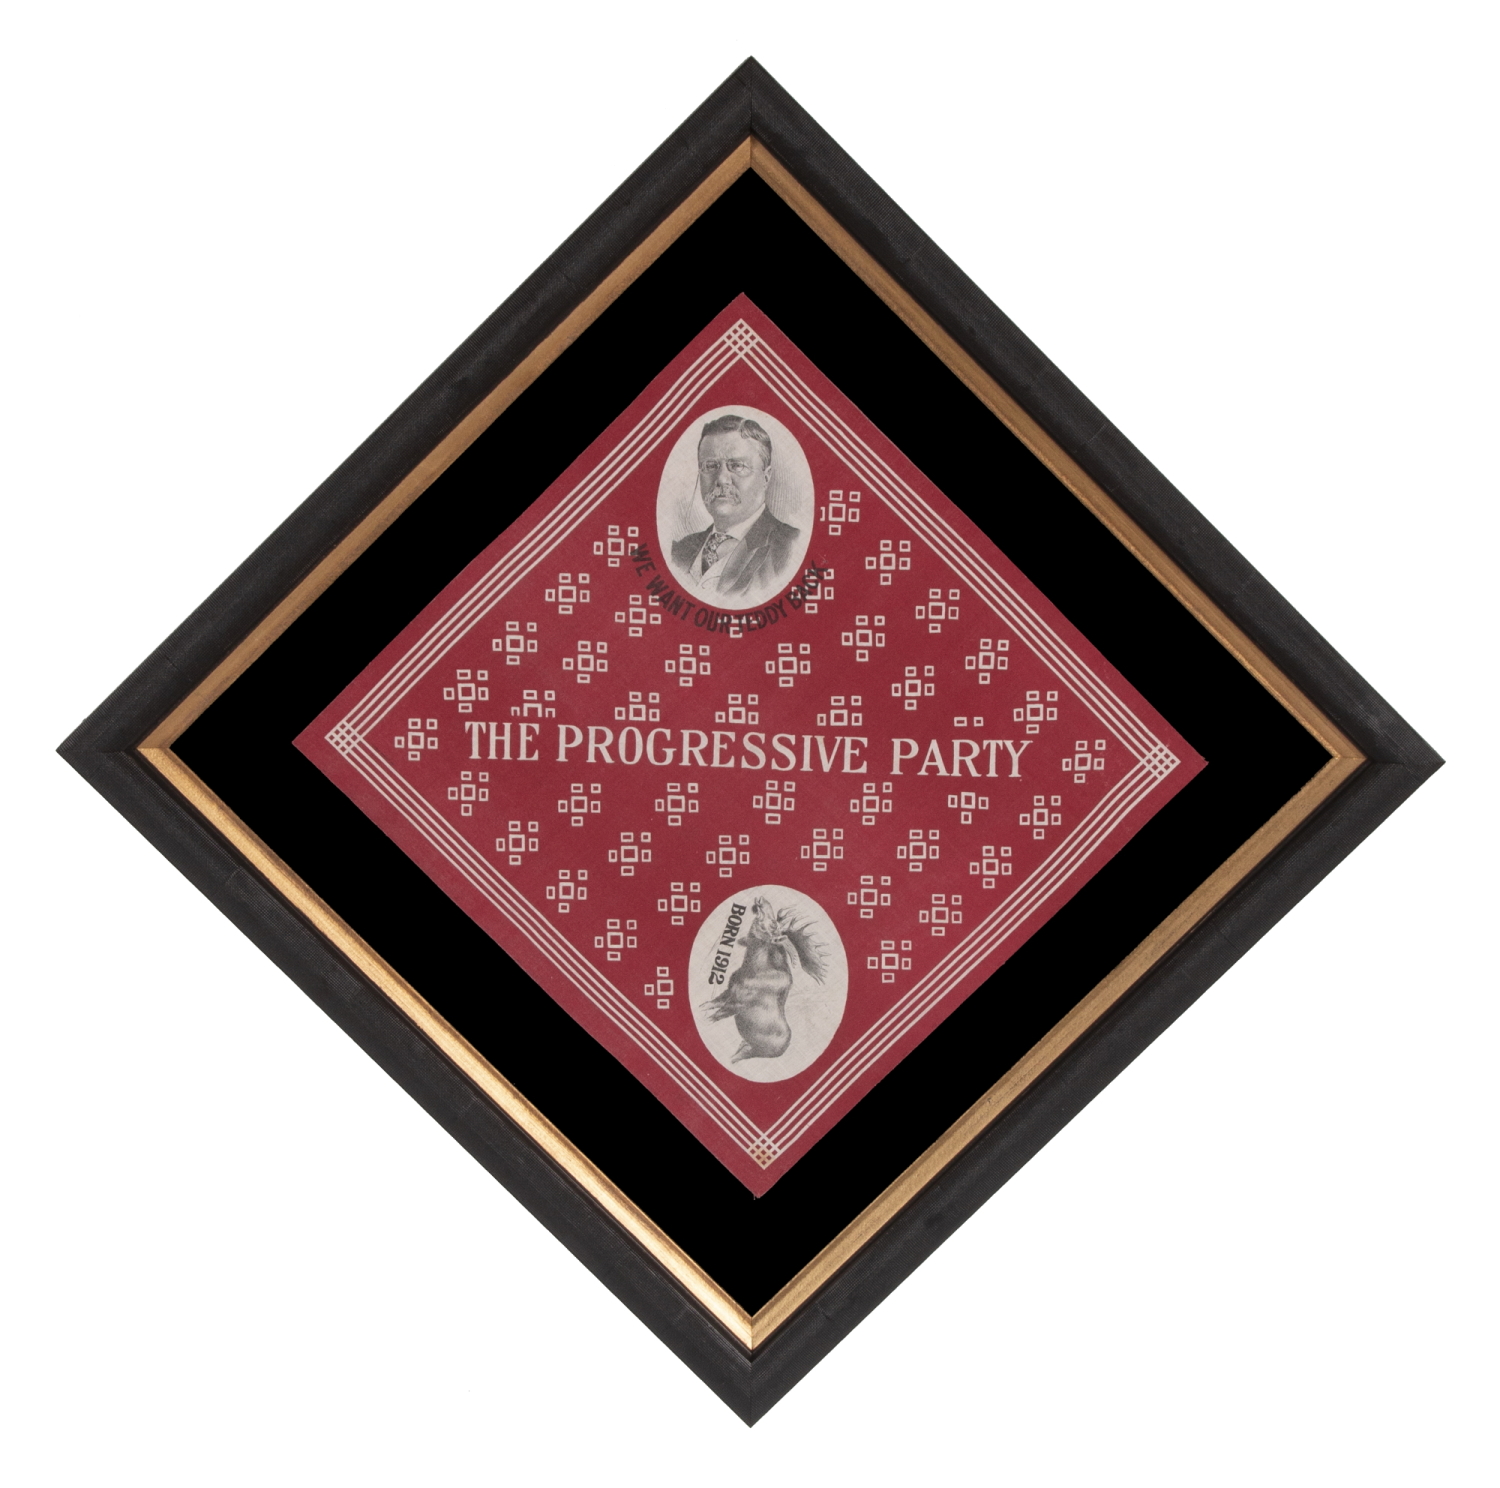 DIAGONAL FORMAT KERCHIEF WITH THE IMAGES OF A BULL MOOSE AND A PORTRAIT OF THEODORE ROOSEVELT, MADE HIS 1912 PRESIDENTIAL CAMPAIGN, WHEN HE RAN ON THE INDEPENDENT, PROGRESSIVE PARTY TICKET, AN EXTREMELY SCARCE AND GRAPHICALLY PLEASING EXAMPLE